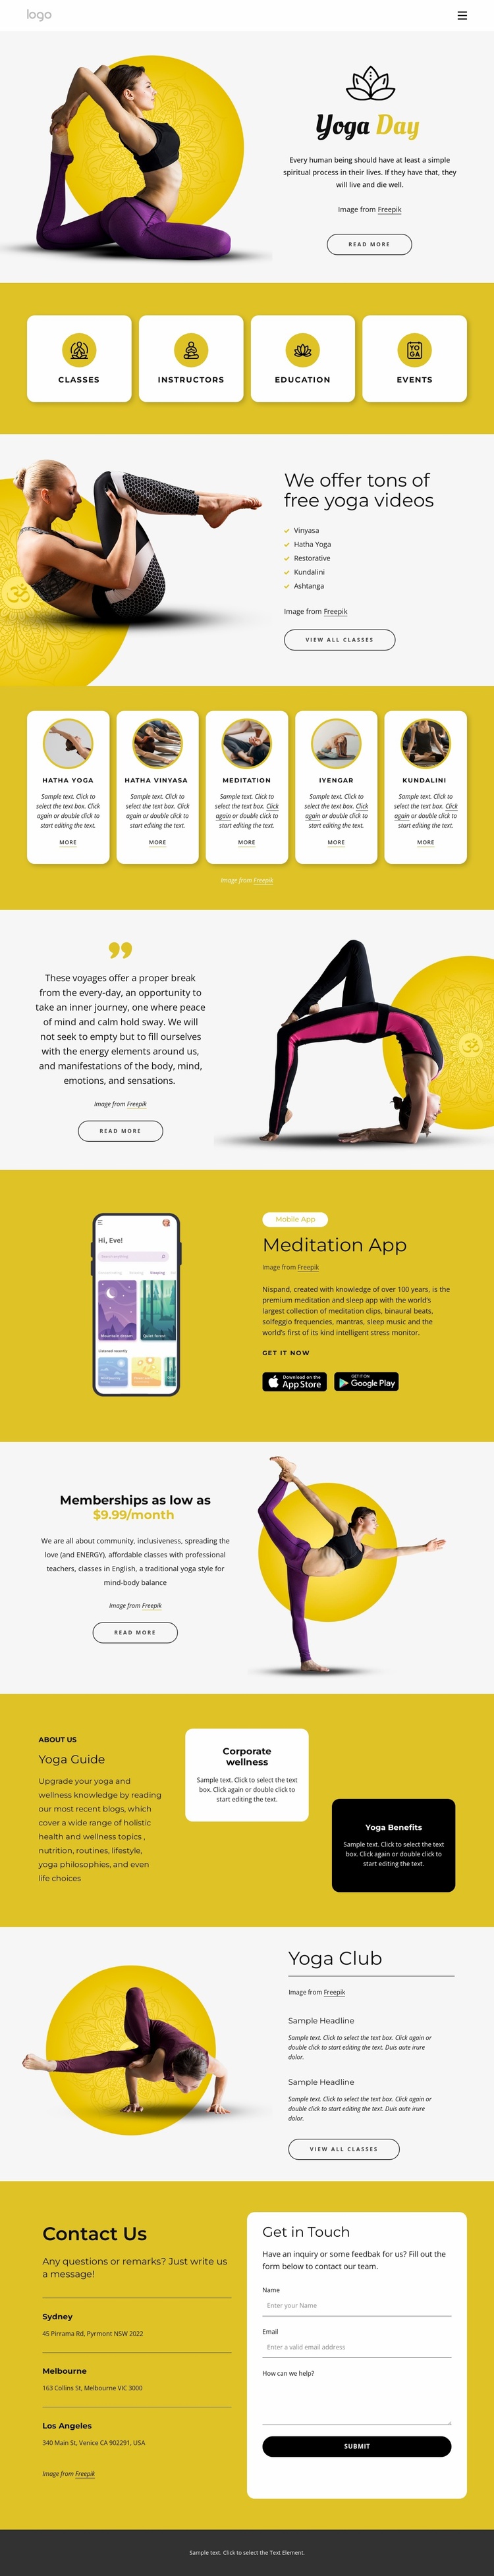 Yoga events and classes Website Template